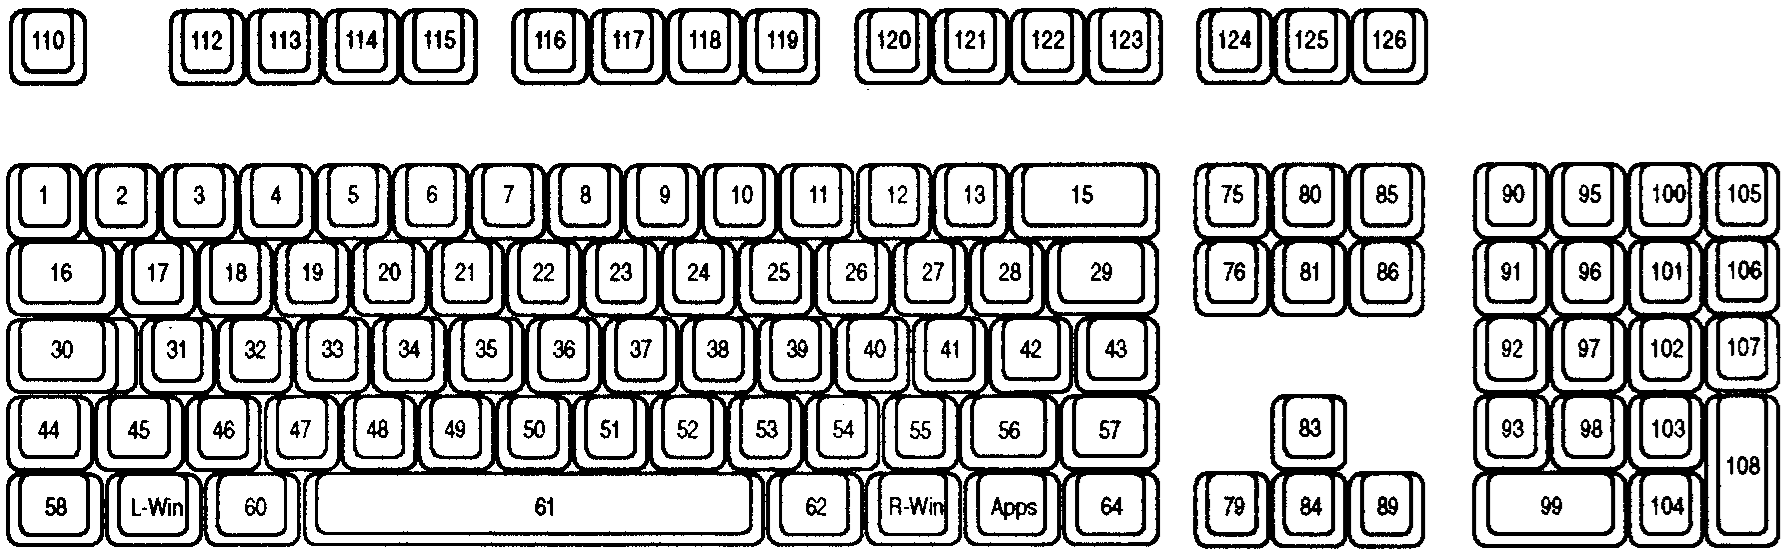 Diagram of a Type 4 keyboard with the key locations for each key.